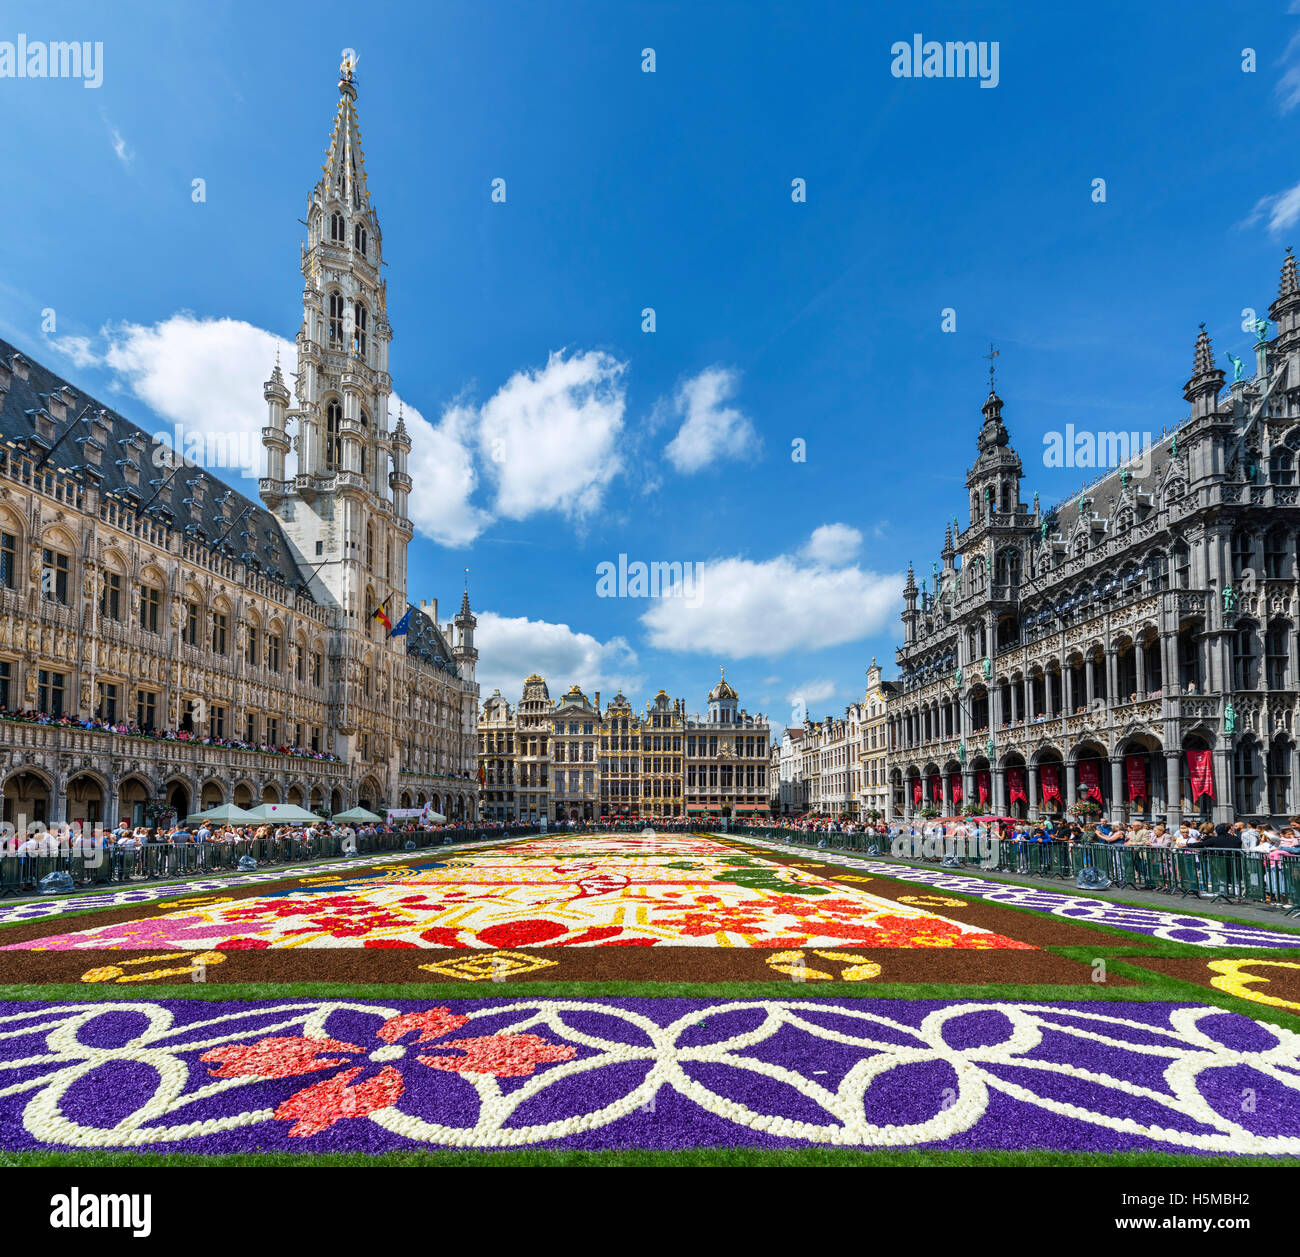 The 2016 Carpet of Flowers in the Grand Place (Grote Markt) with the Town Hall to the left, Brussels, Belgium. Stock Photo